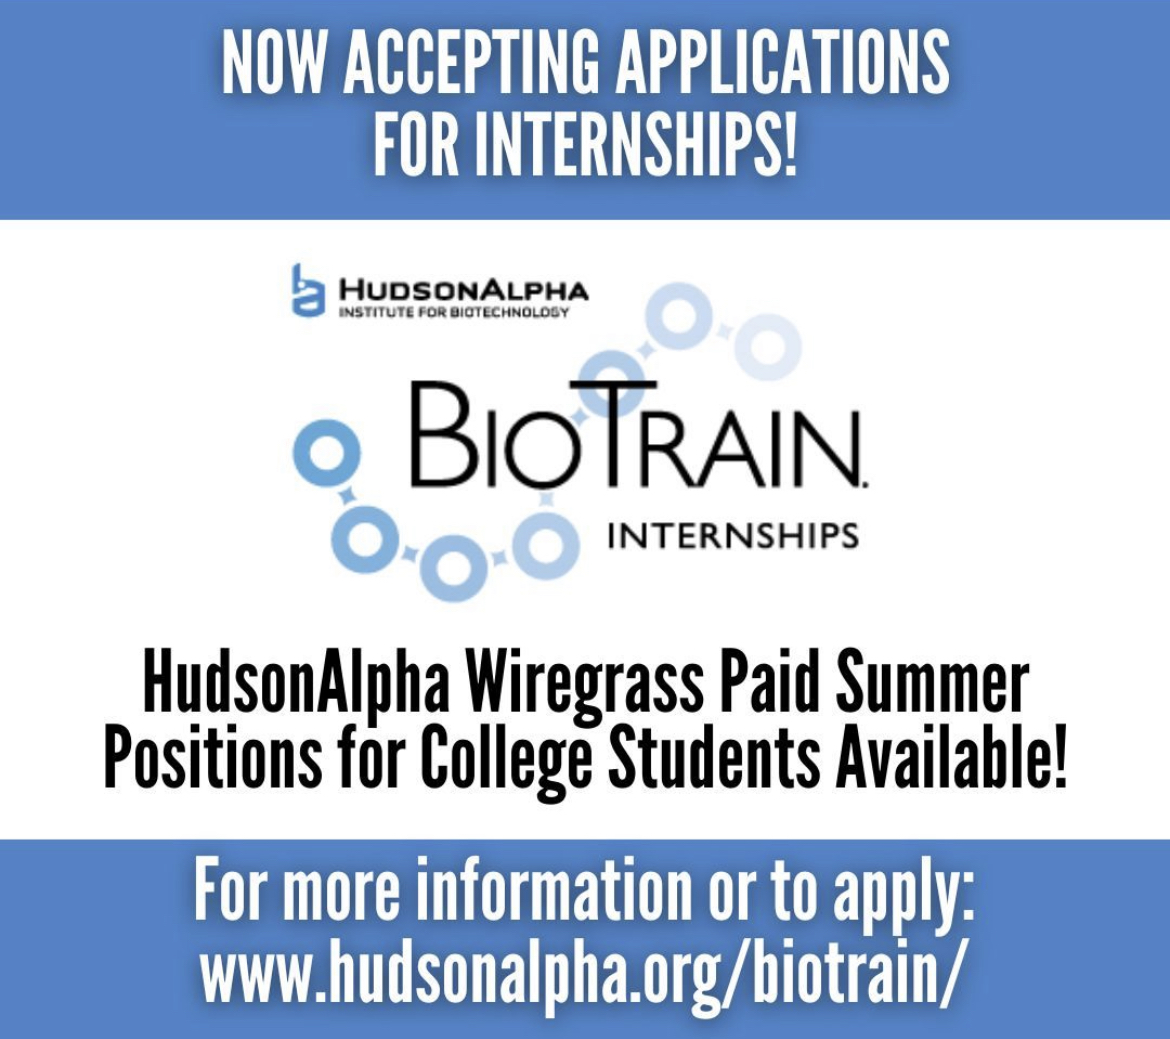 Apply for our Biotrain internship program! Students from around Dothan and the Wiregrass area can spend a summer interning at HudsonAlpha Wiregrass, either in a lab or with professionals in agriculture🪴🚜 Apply by this Thursday: hudsonalpha.org/biotrain/